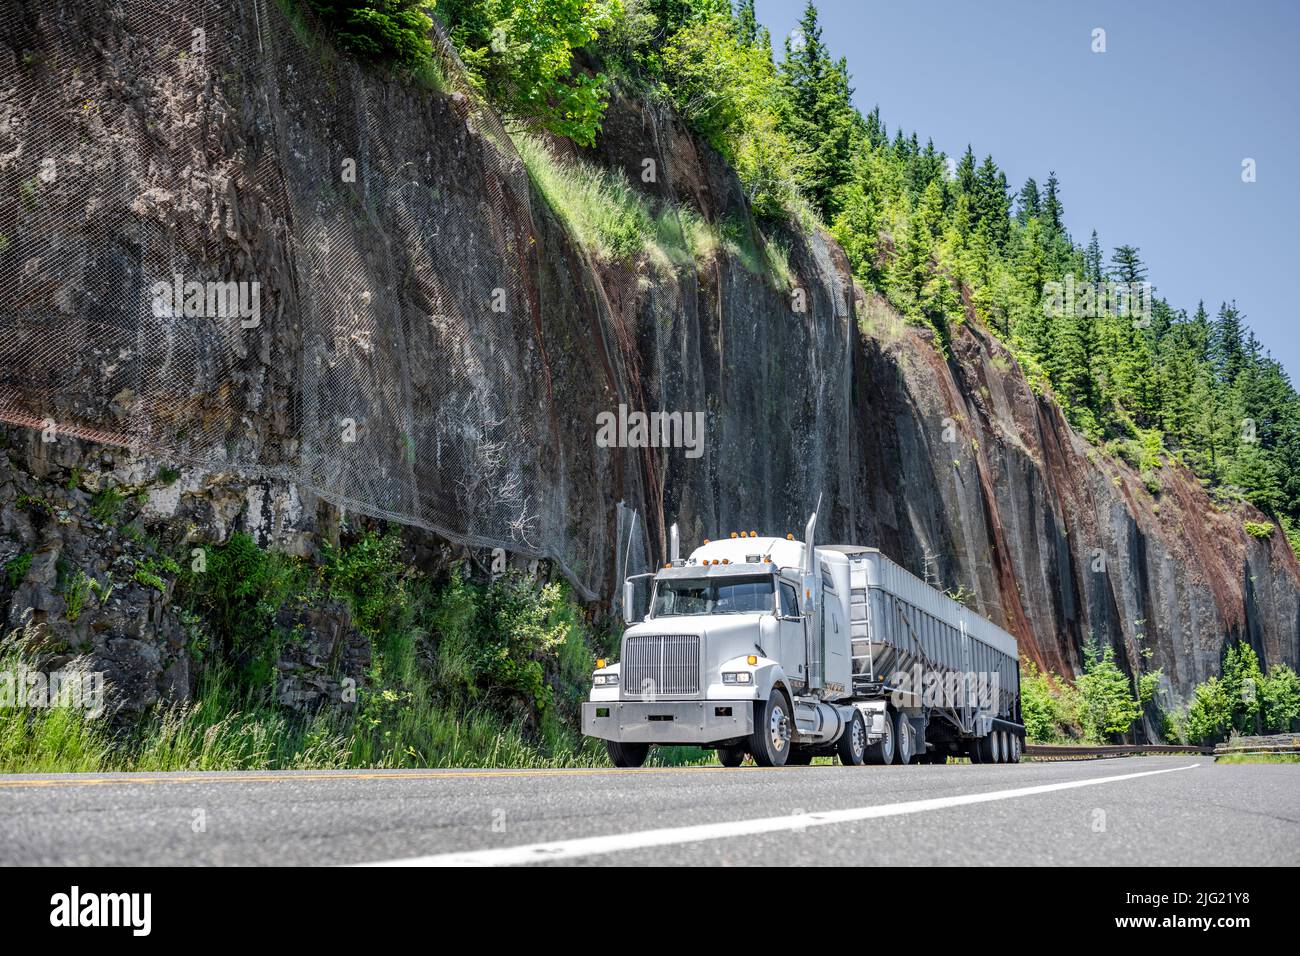 Powerful white big rig semi truck tractor transporting cargo in bulk semi trailer driving on the winding mountain narrow highway road with rock wall a Stock Photo